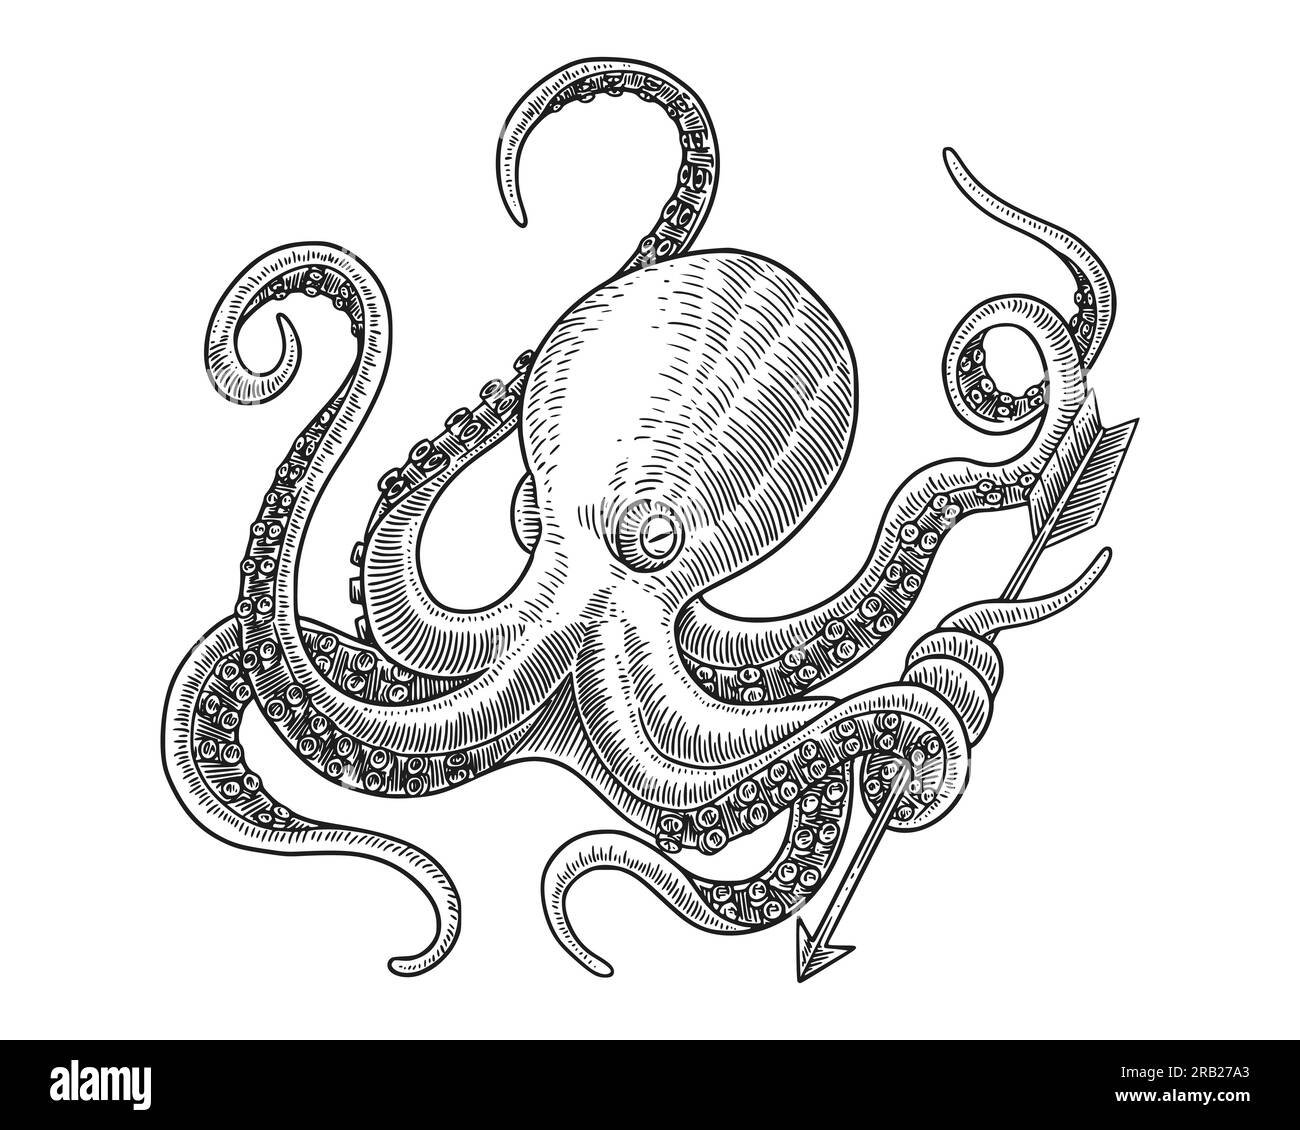 octopus with engraving drawing style. Vector vintage illustration Stock Vector